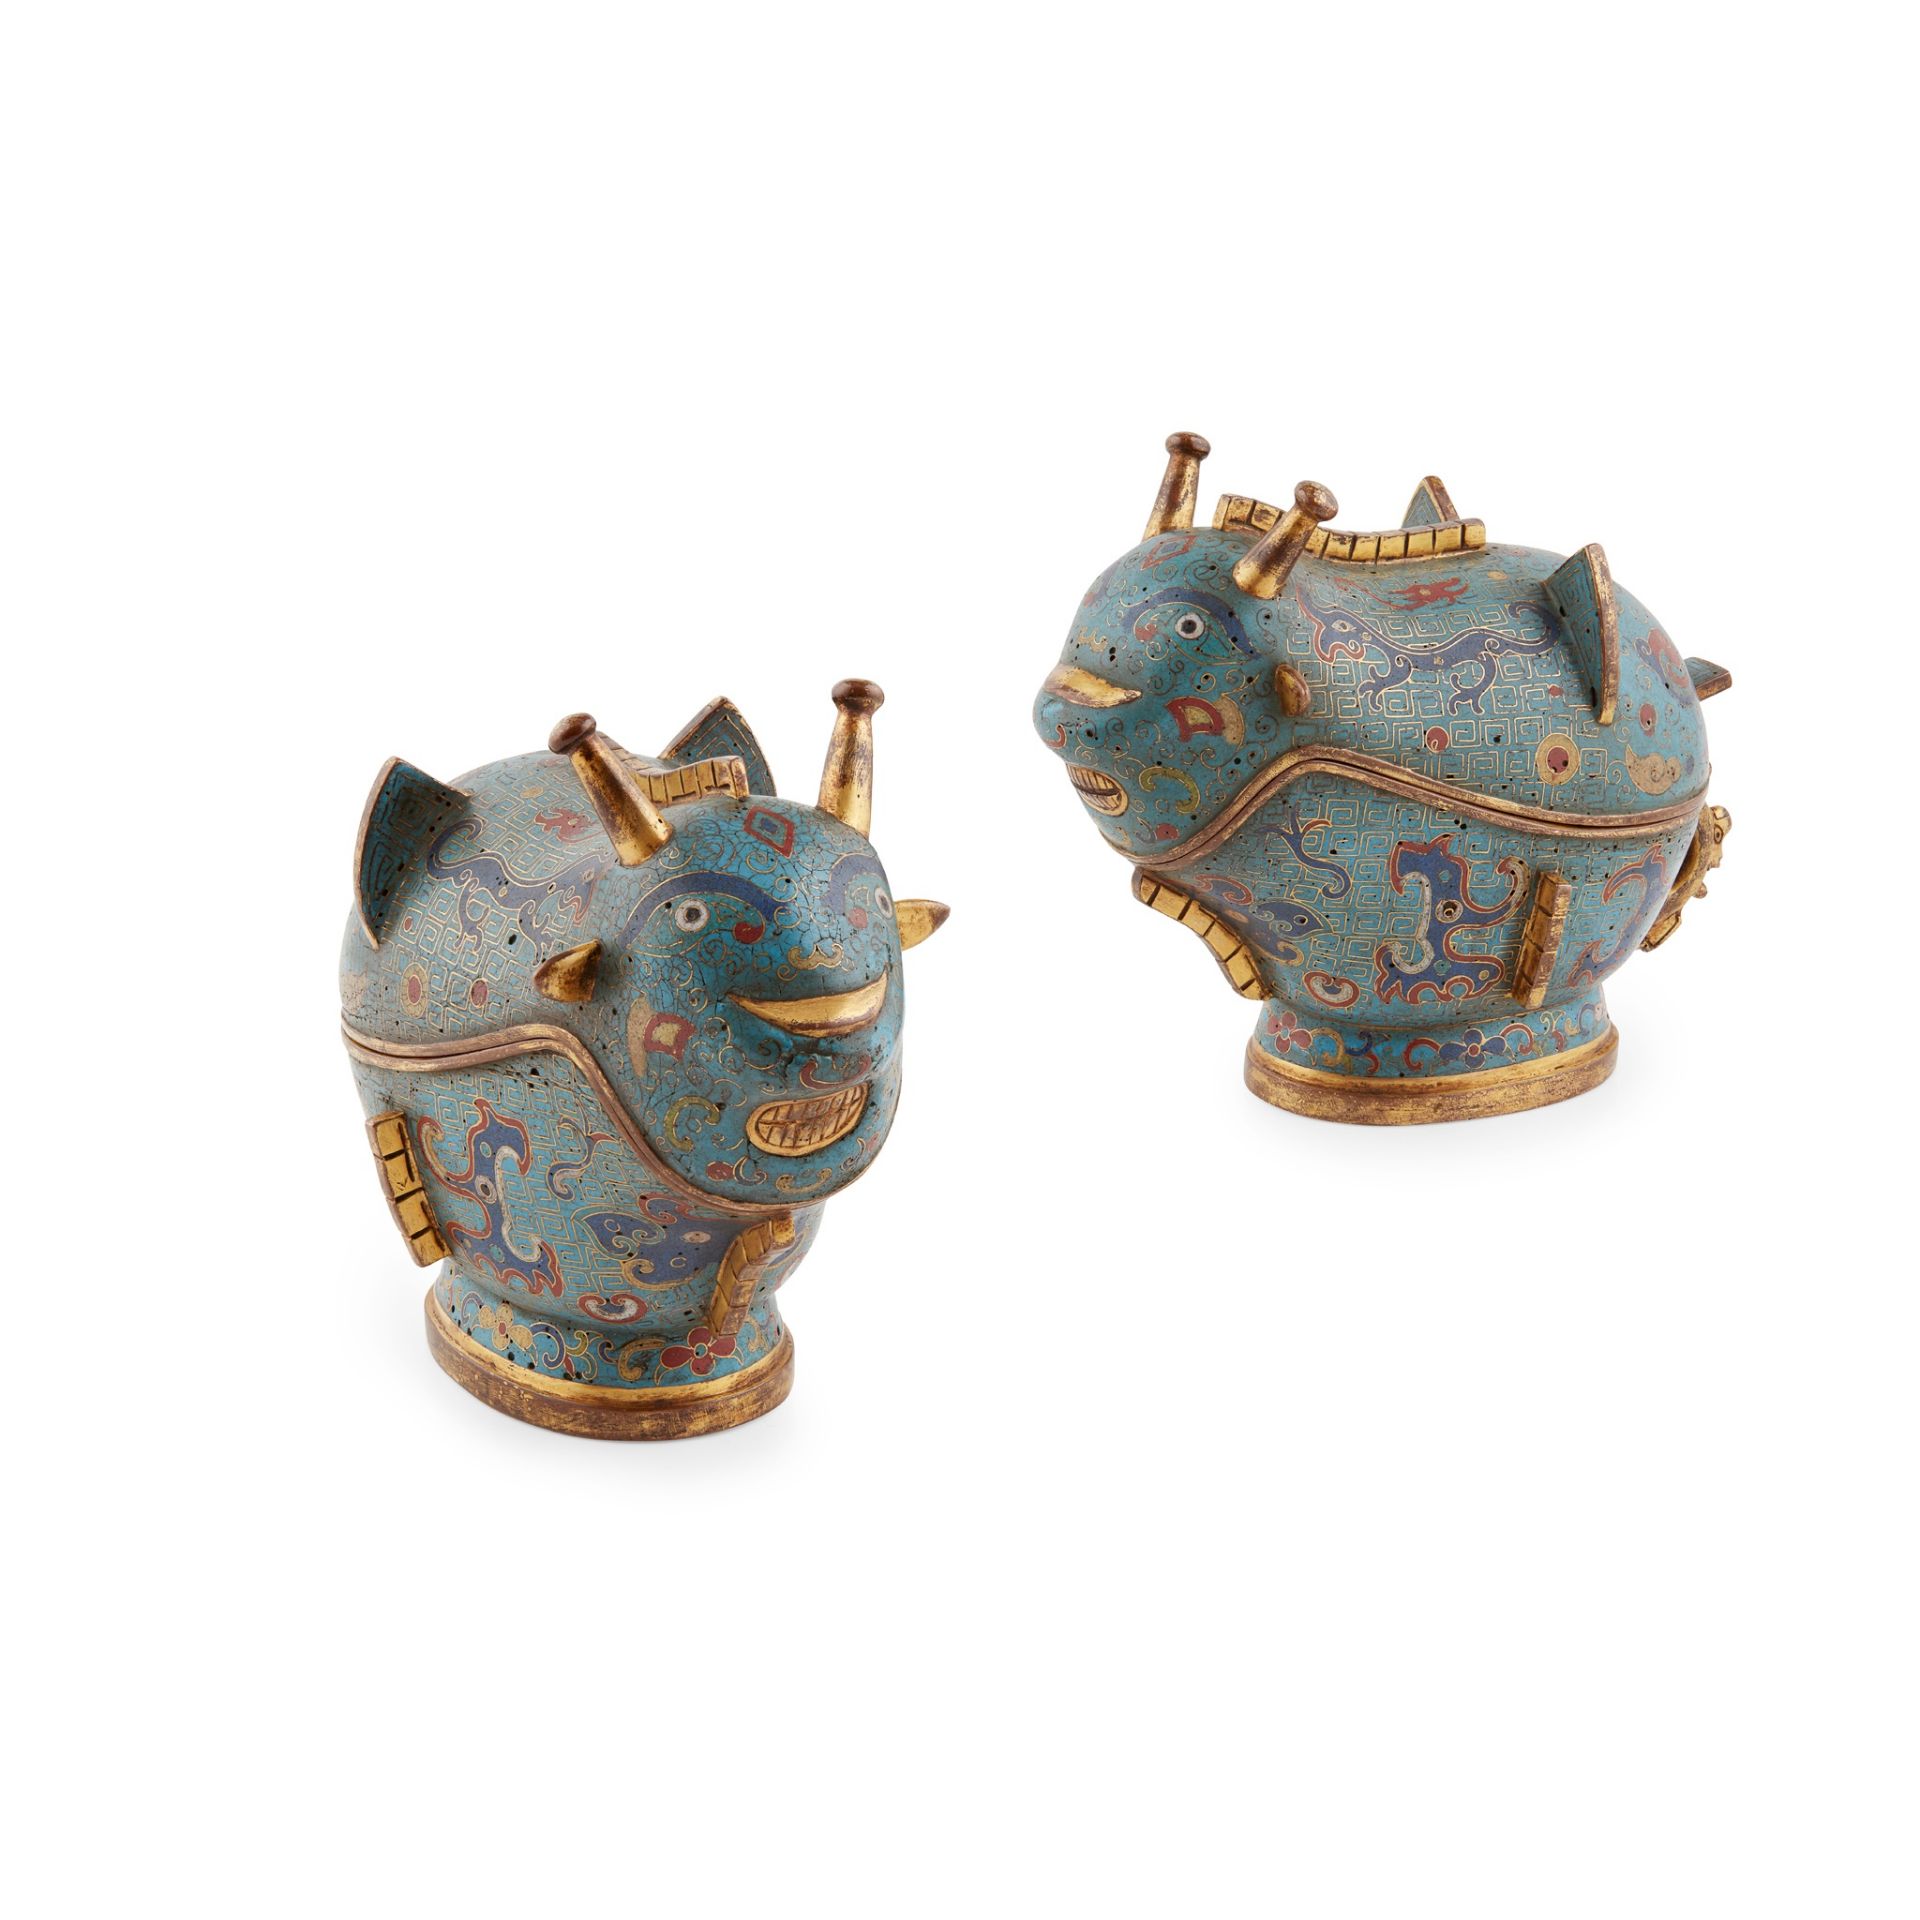 PAIR OF CLOISONNÉ ENAMEL WINE VESSELS AND COVERS, GONG QIANLONG MARK BUT 19TH CENTURY